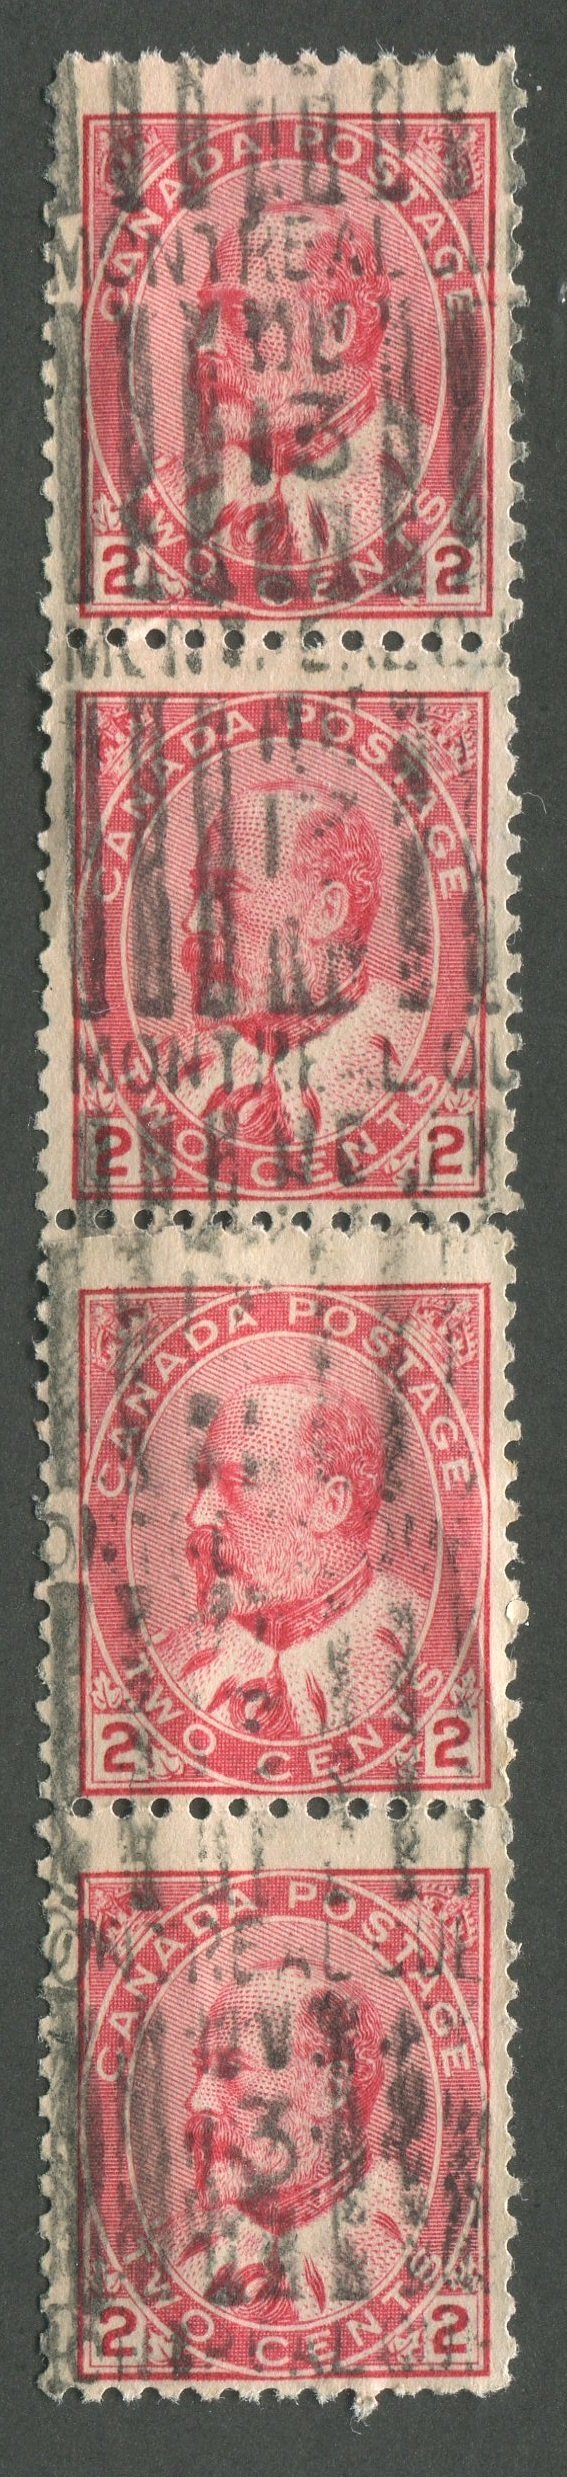 0090CA1709 - Canada #90 - Used Unofficial Experimental Paste-Up Coil Strip of 4